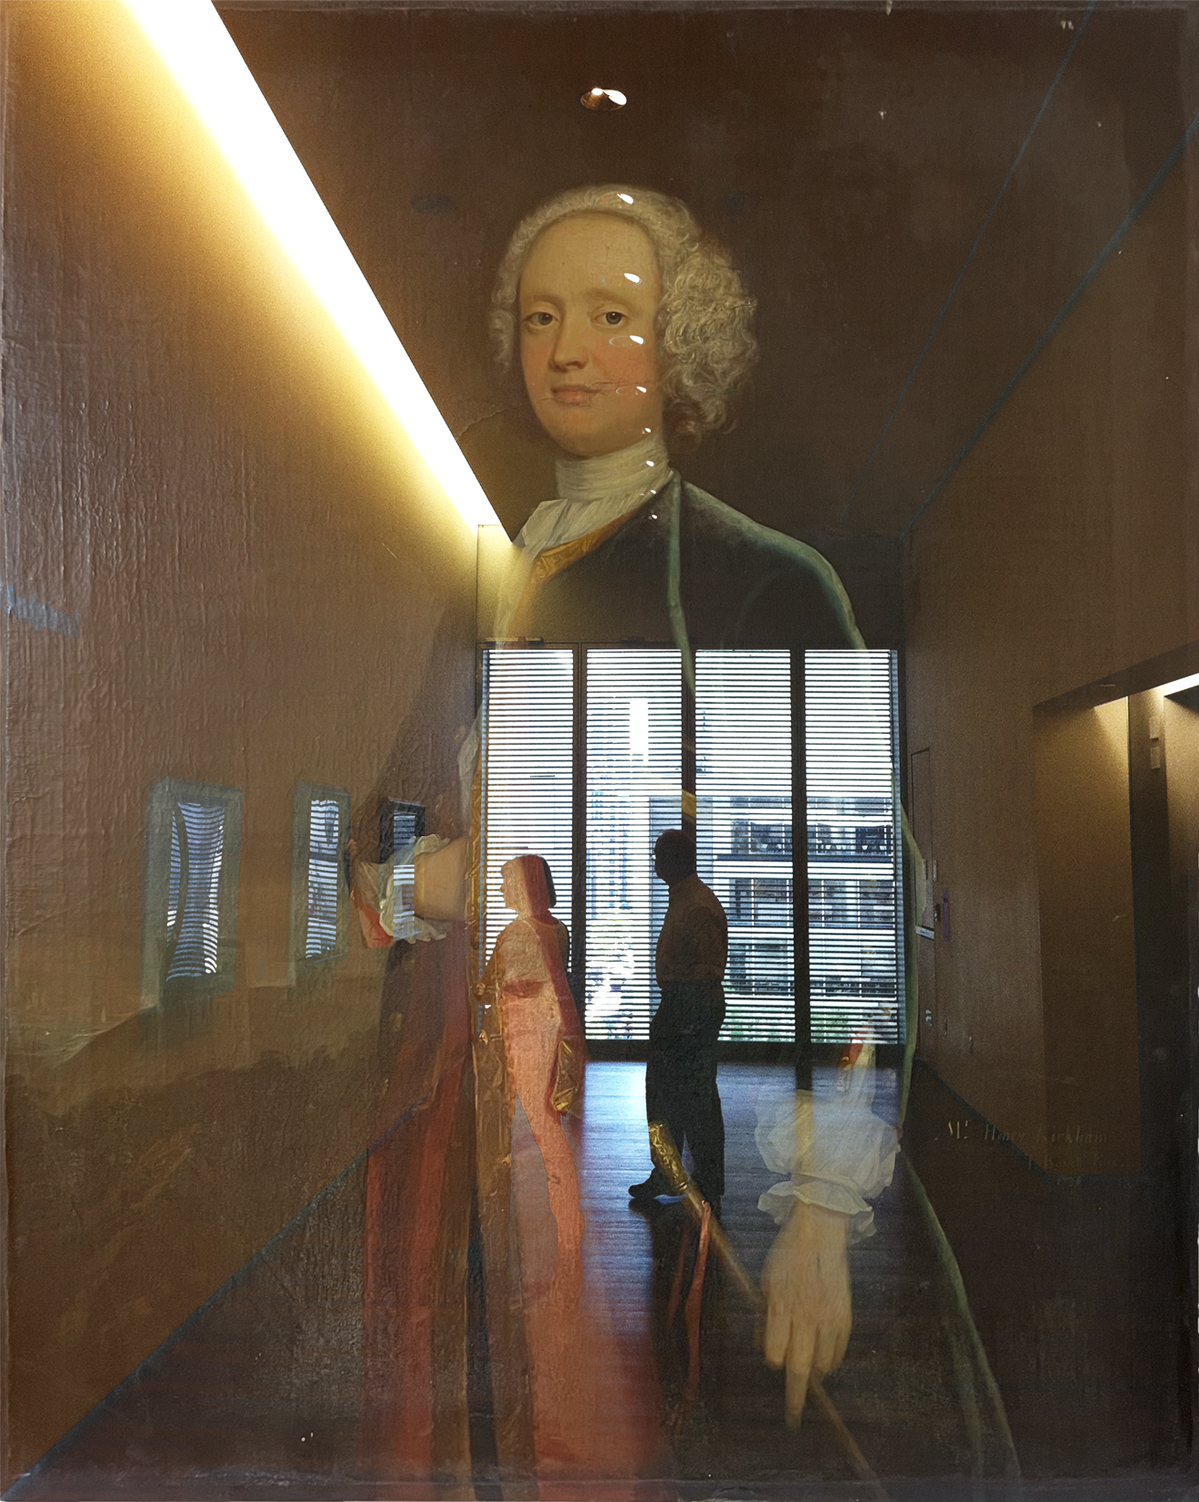 An image of three people in a corridor superimposed over an old painting of a person.